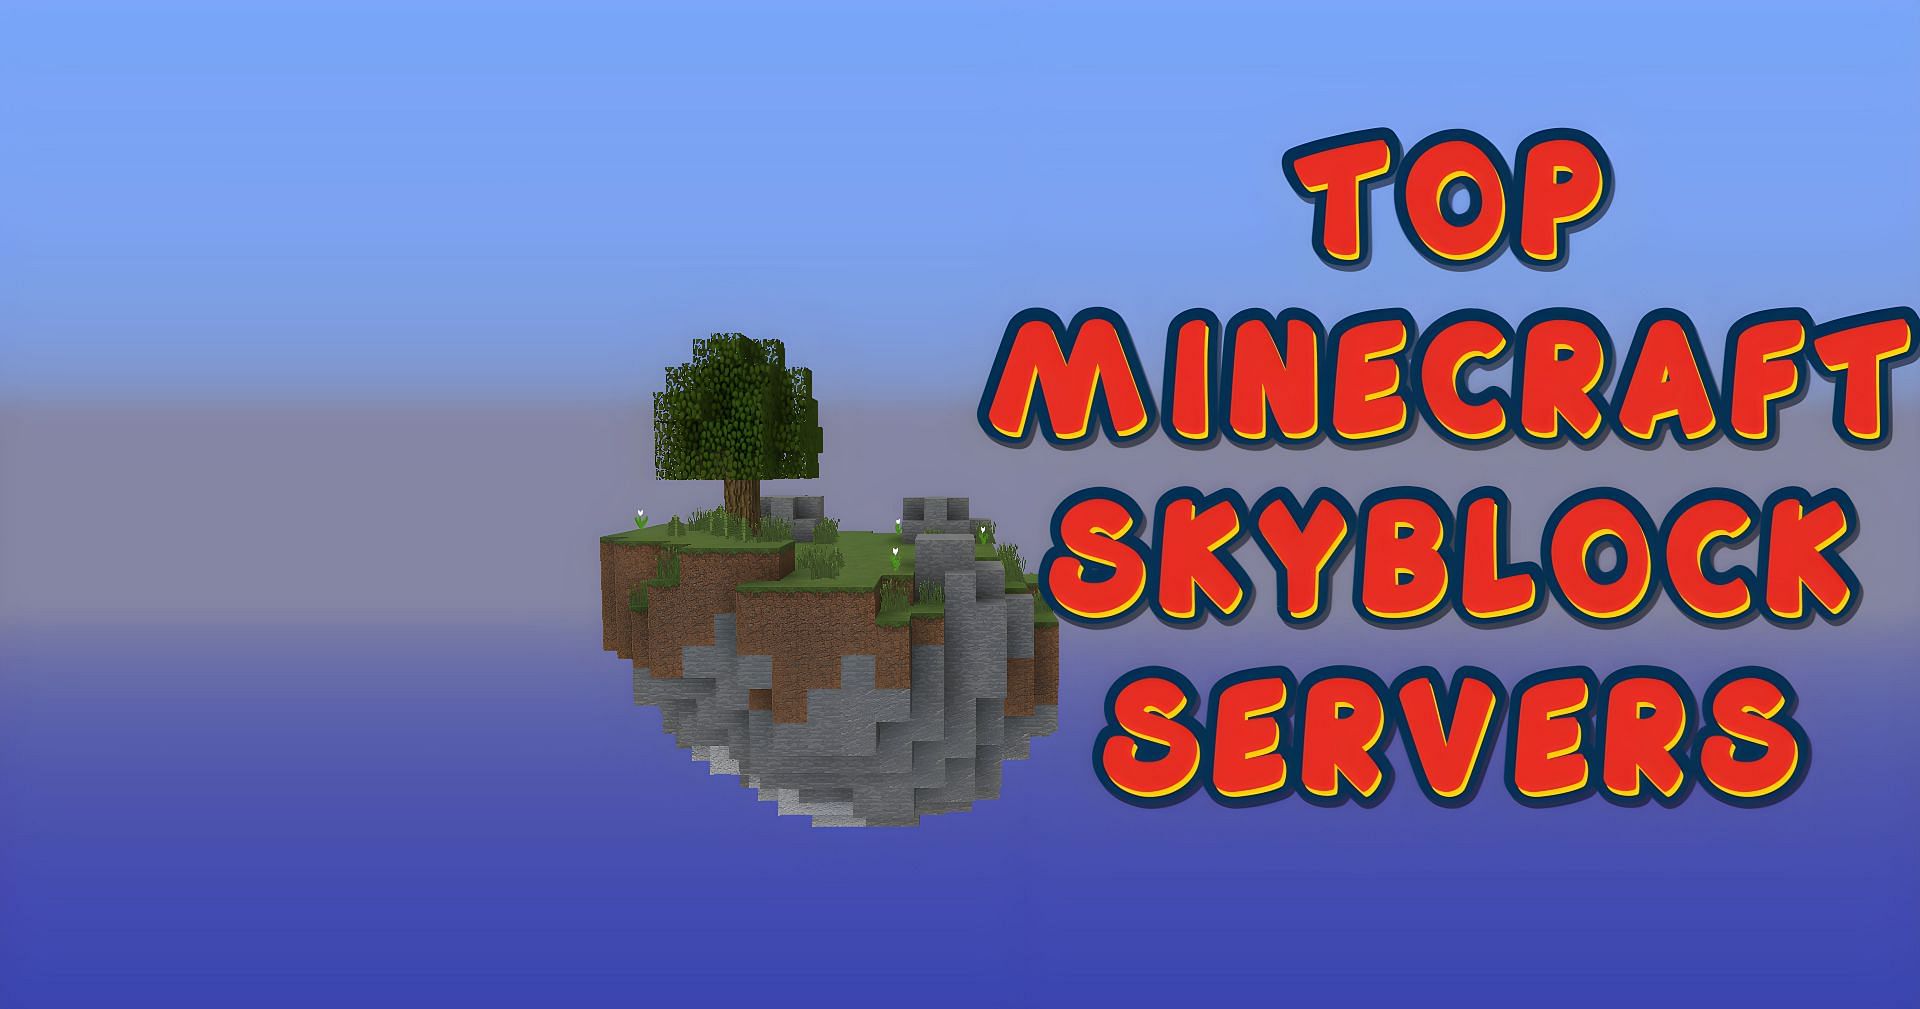 Skyblock is one of the most played gamemodes within Minecraft (Image via Sportskeeda)